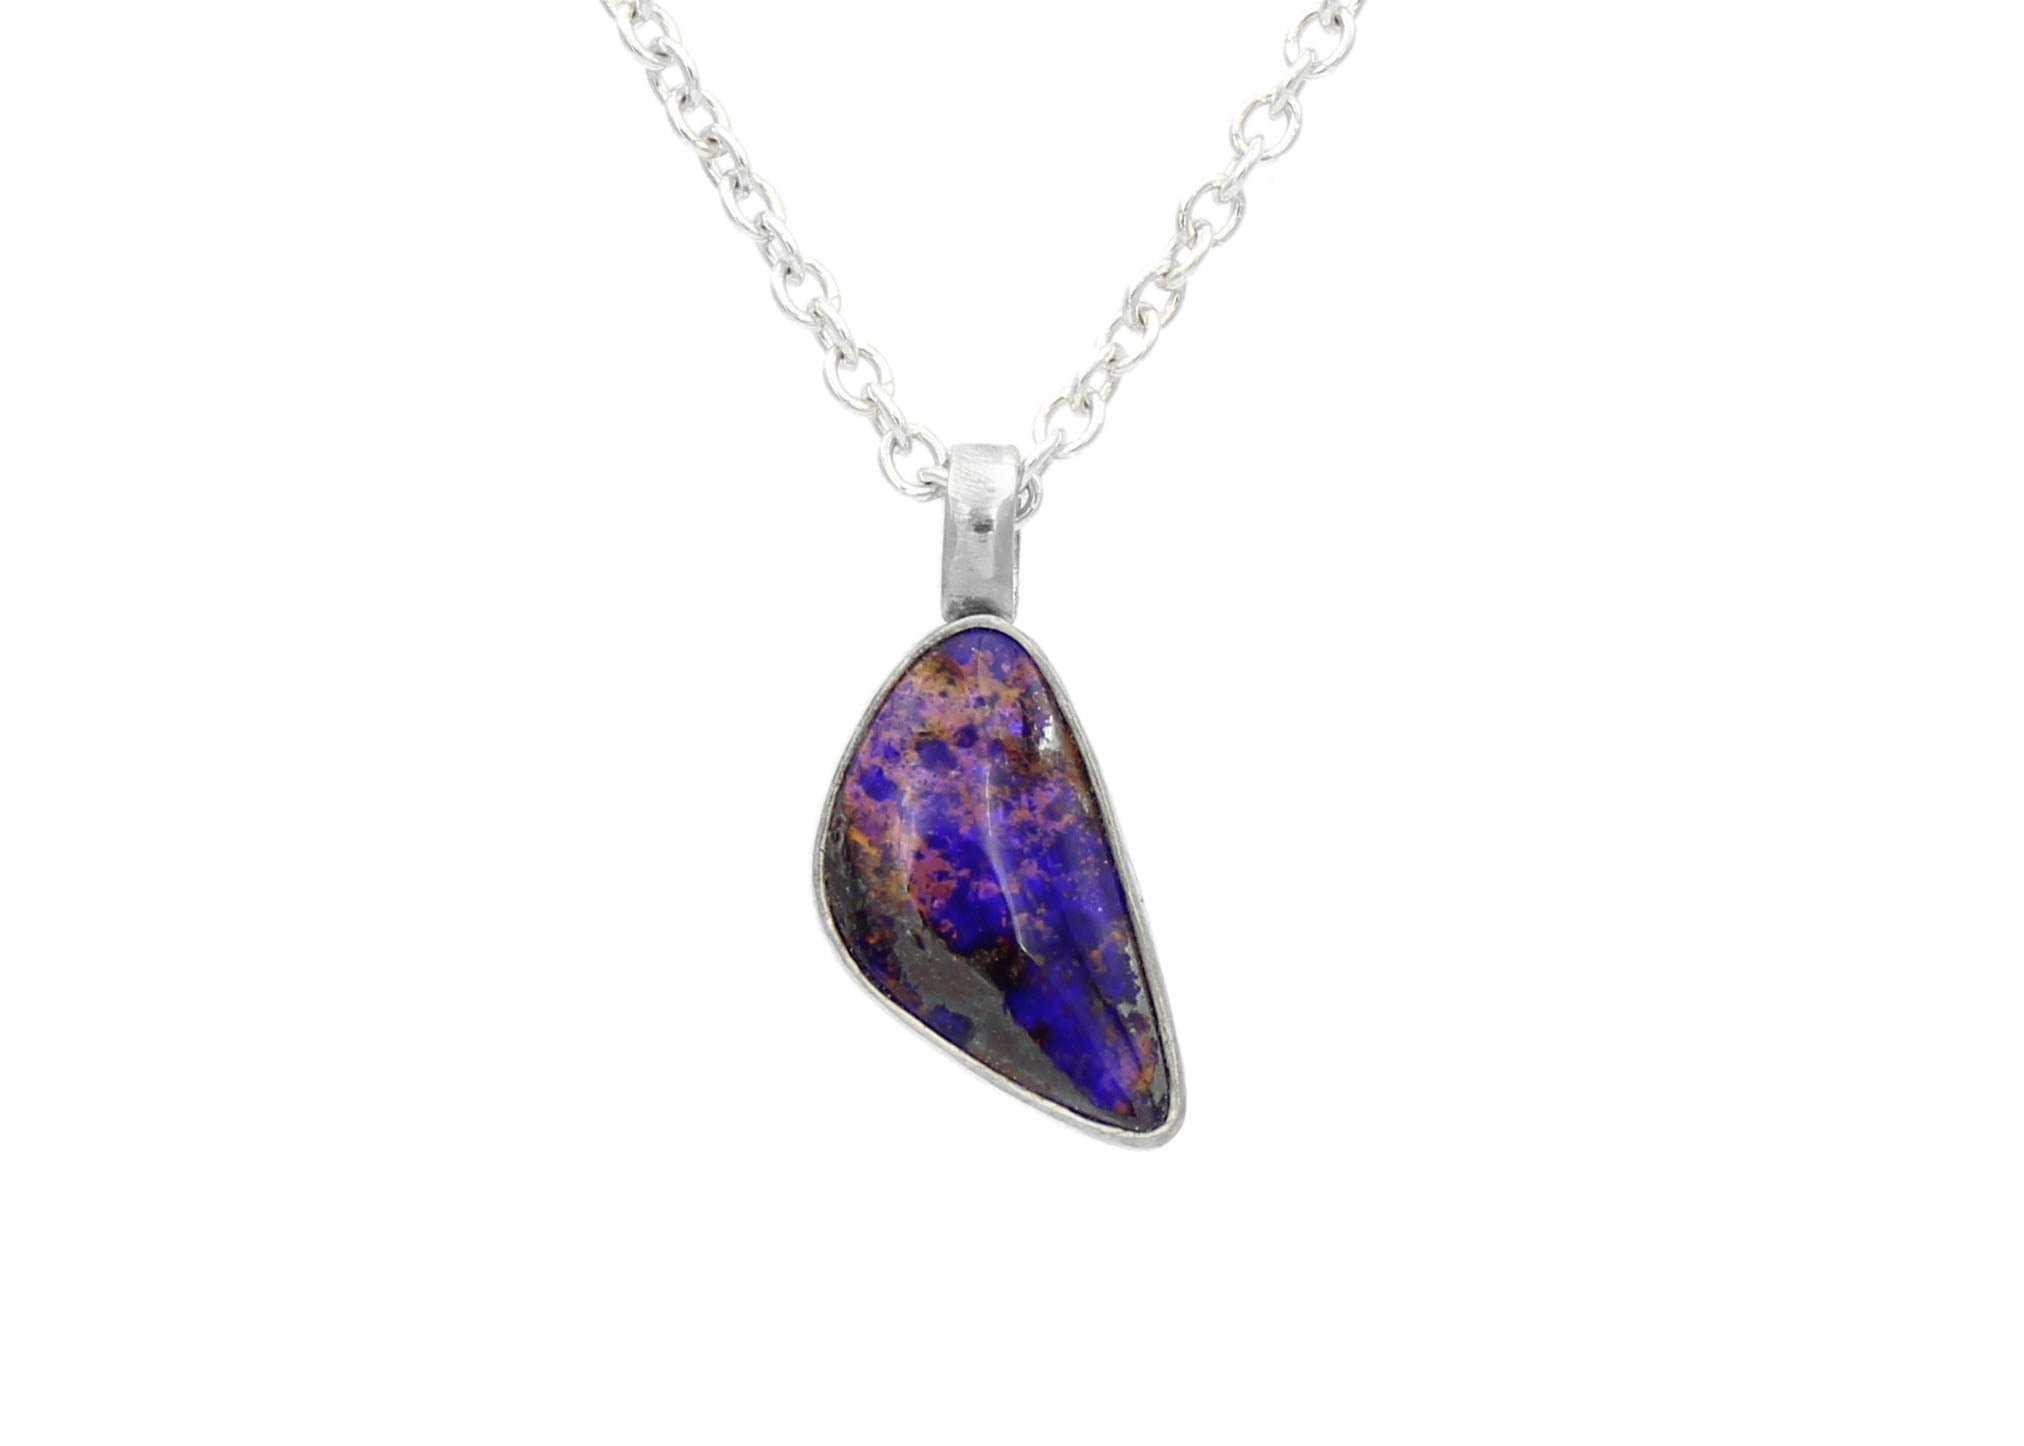 Australian Opal Necklace, 0.75 Carat Natural Solid Cabochon Opal Pendant,  8x6mm Oval Cab, Australia, Sterling Silver, Pink Purple Green